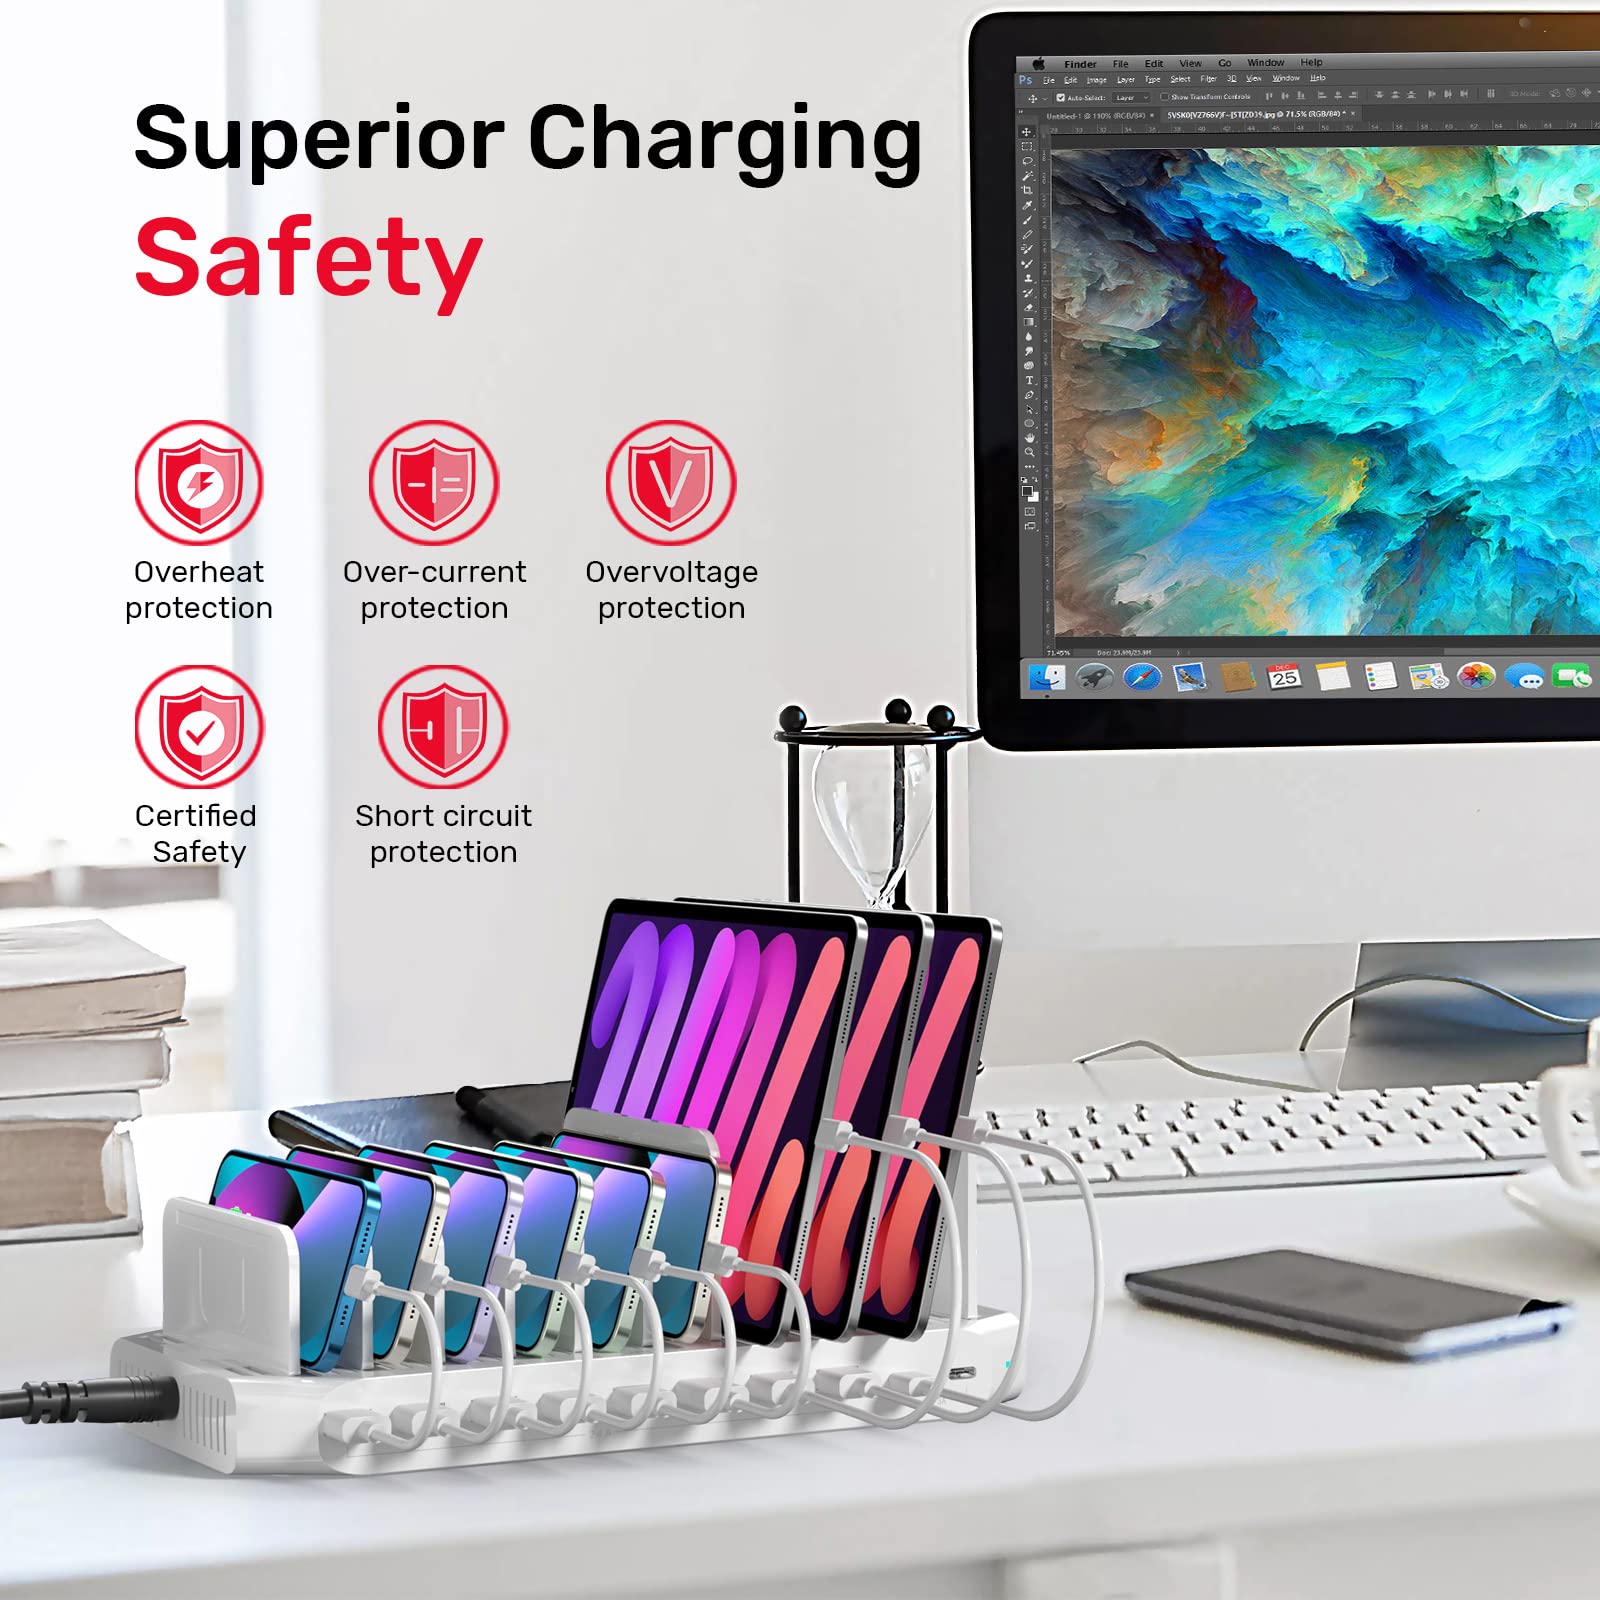 Unitek USB C Charging Station, 120W 10 Port Type C Charging Organizer for Multiple Devices, iPhone, Smartphones, Tablets, Supports 10 iPads Charging Simultaneously- [UL Certified]